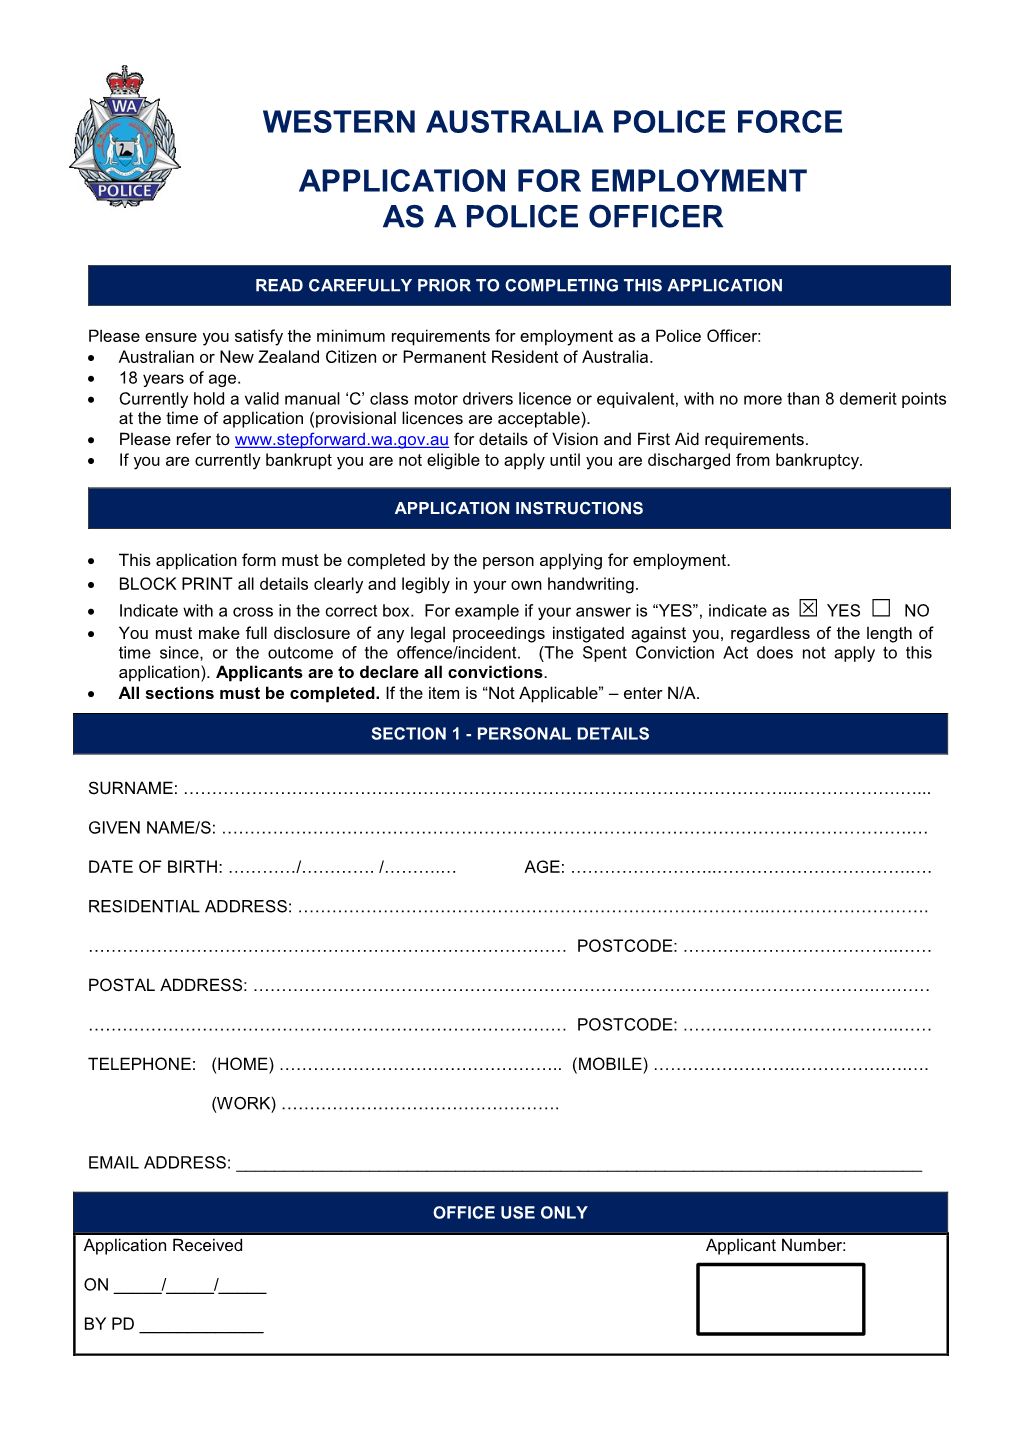 Western Australia Police Force Application For